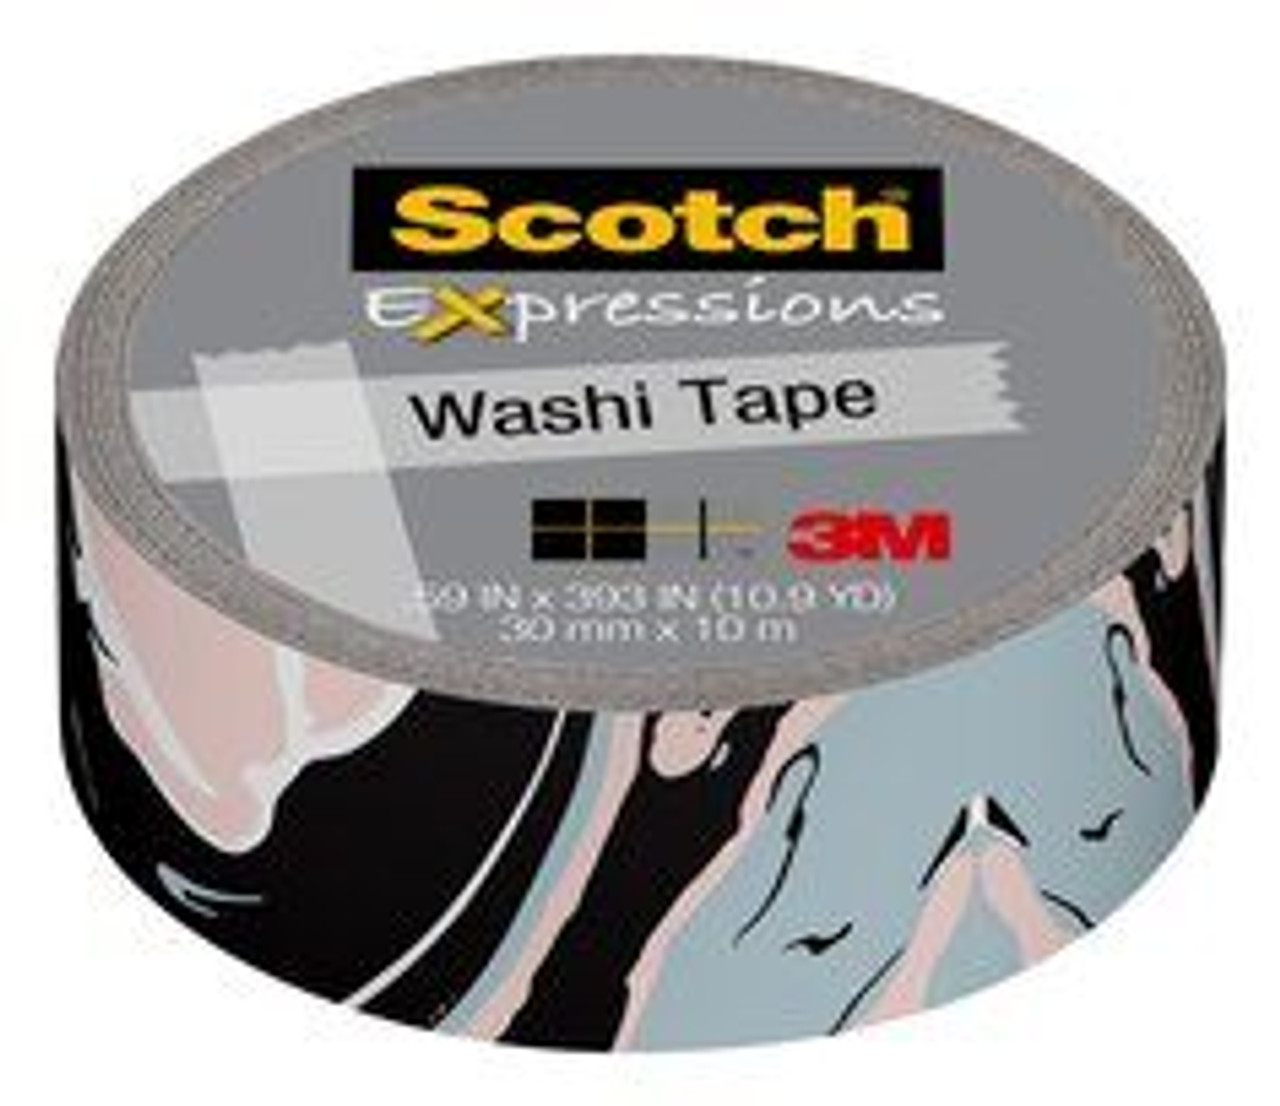 Scotch Expressions Washi Tape C314-P95 .59 in x 393 in 15 mm x 10 M Marble